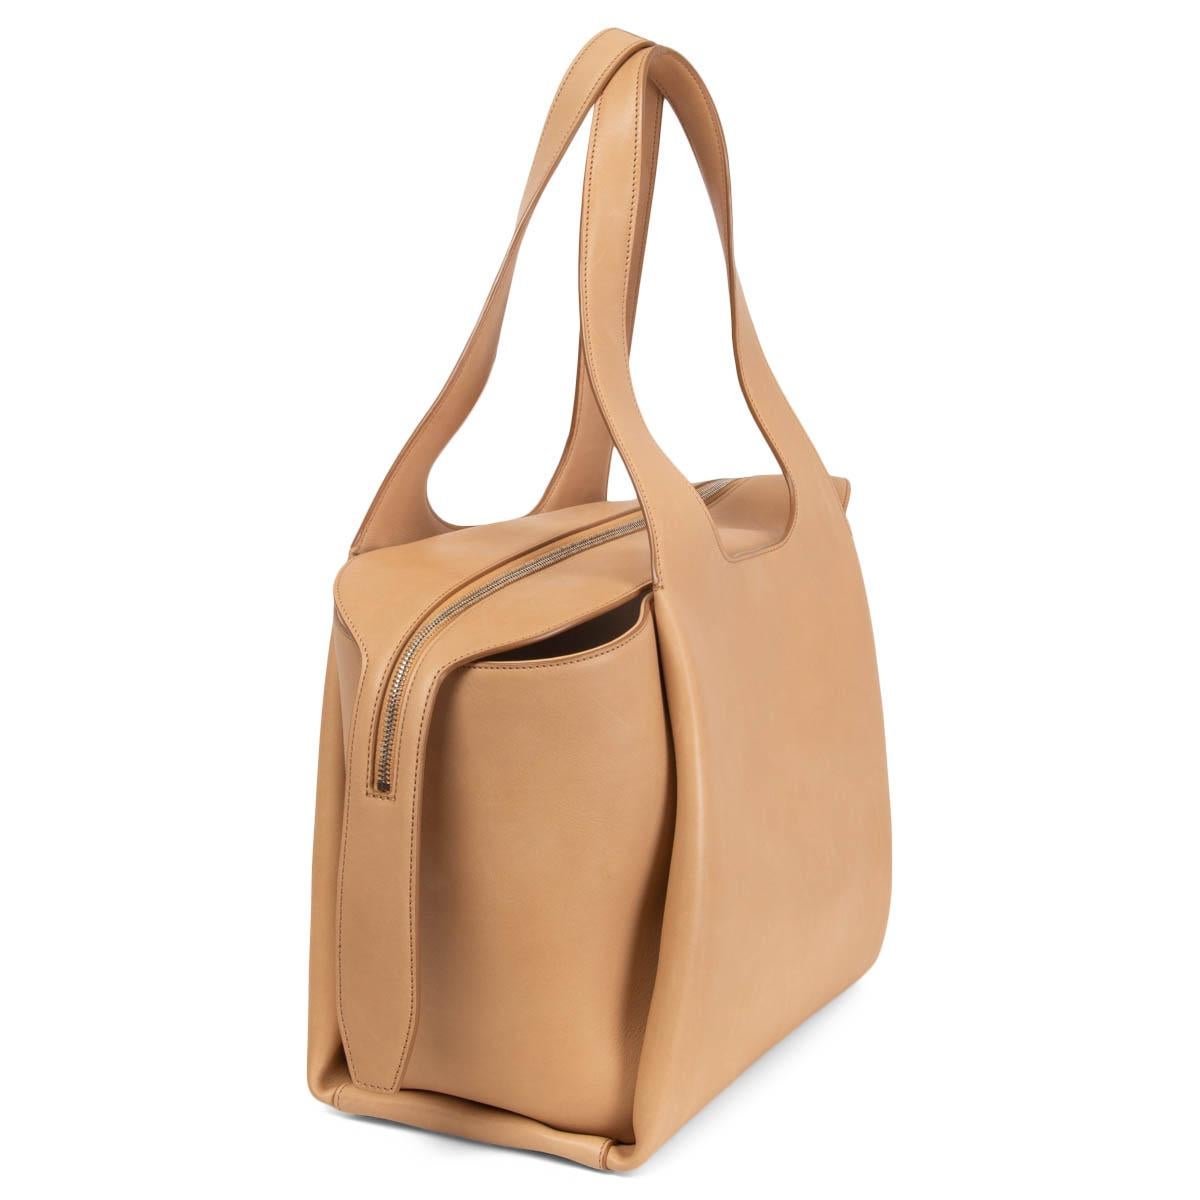 100% authentic The Row Large TR1 shoulder bag in Light Cuir (sand) smooth calfskin. Opens with a zipper on top and is lined in off-white canvas with one zipper pocket against the back. Has been carried once or twice and shows some soft scratches to